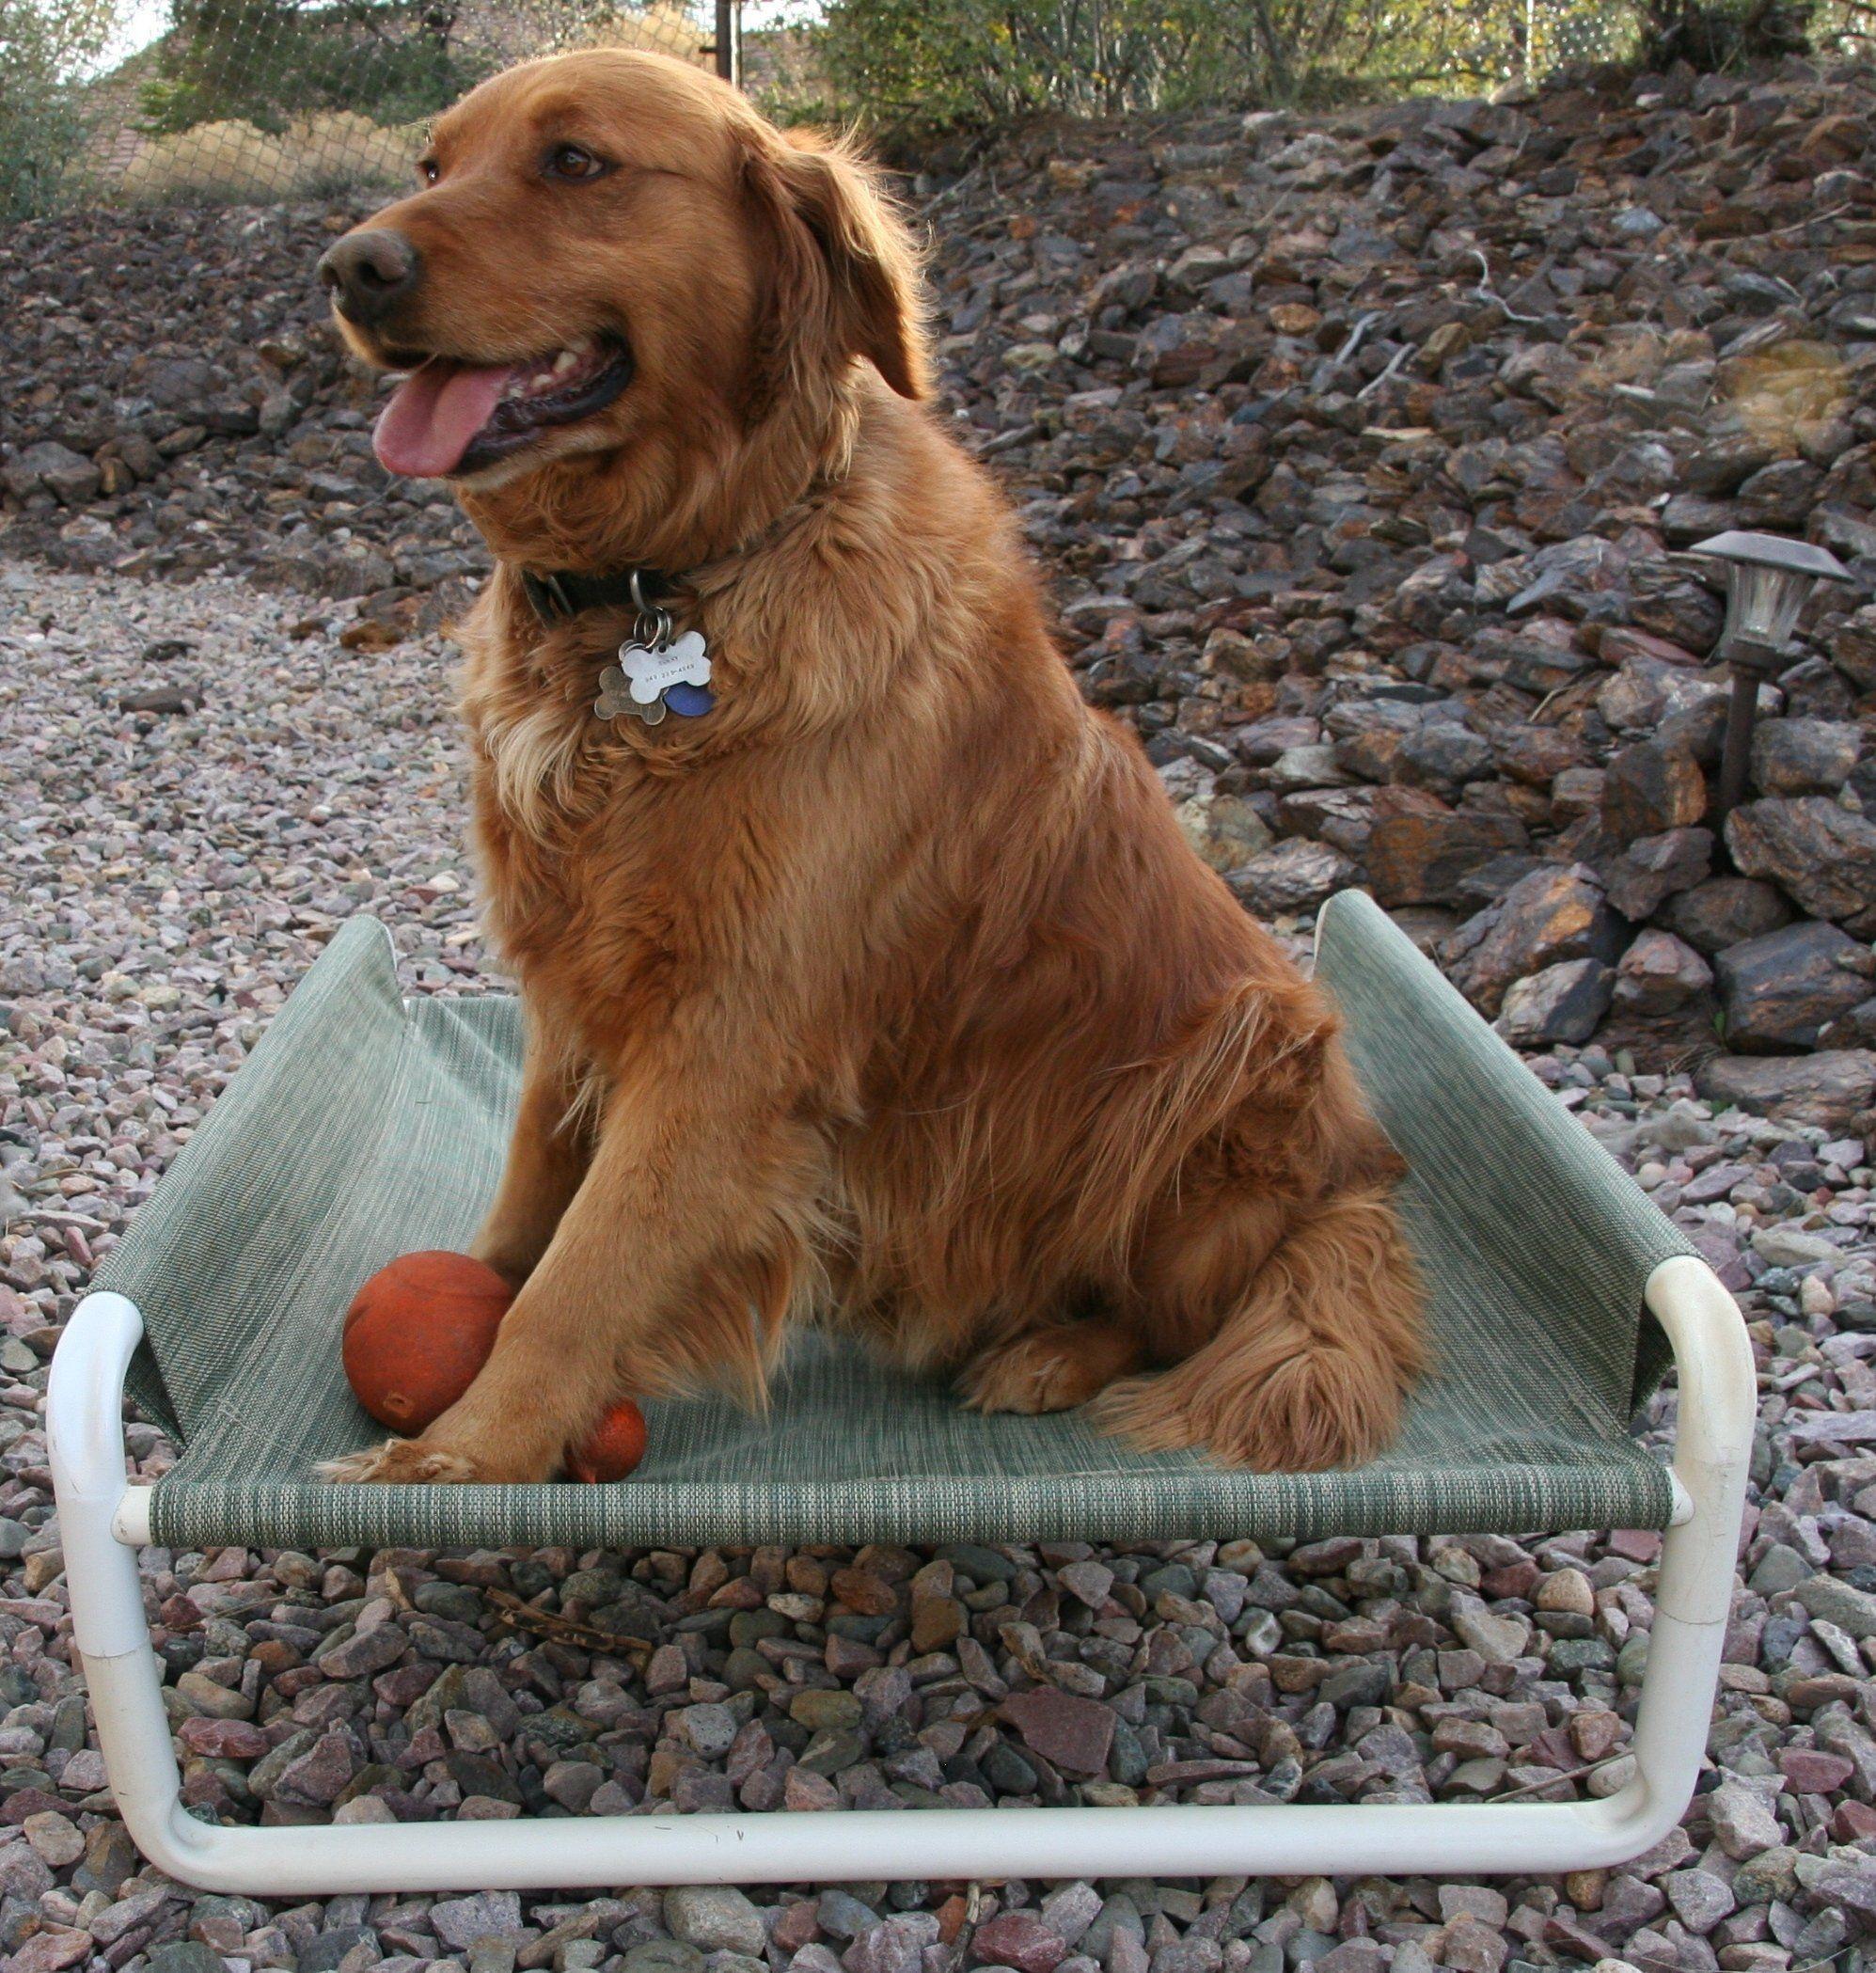 Rover Company Dog Logo - Rover Company Elevated Dog Bed 30 by 36Inch Autumn Fern - Find out